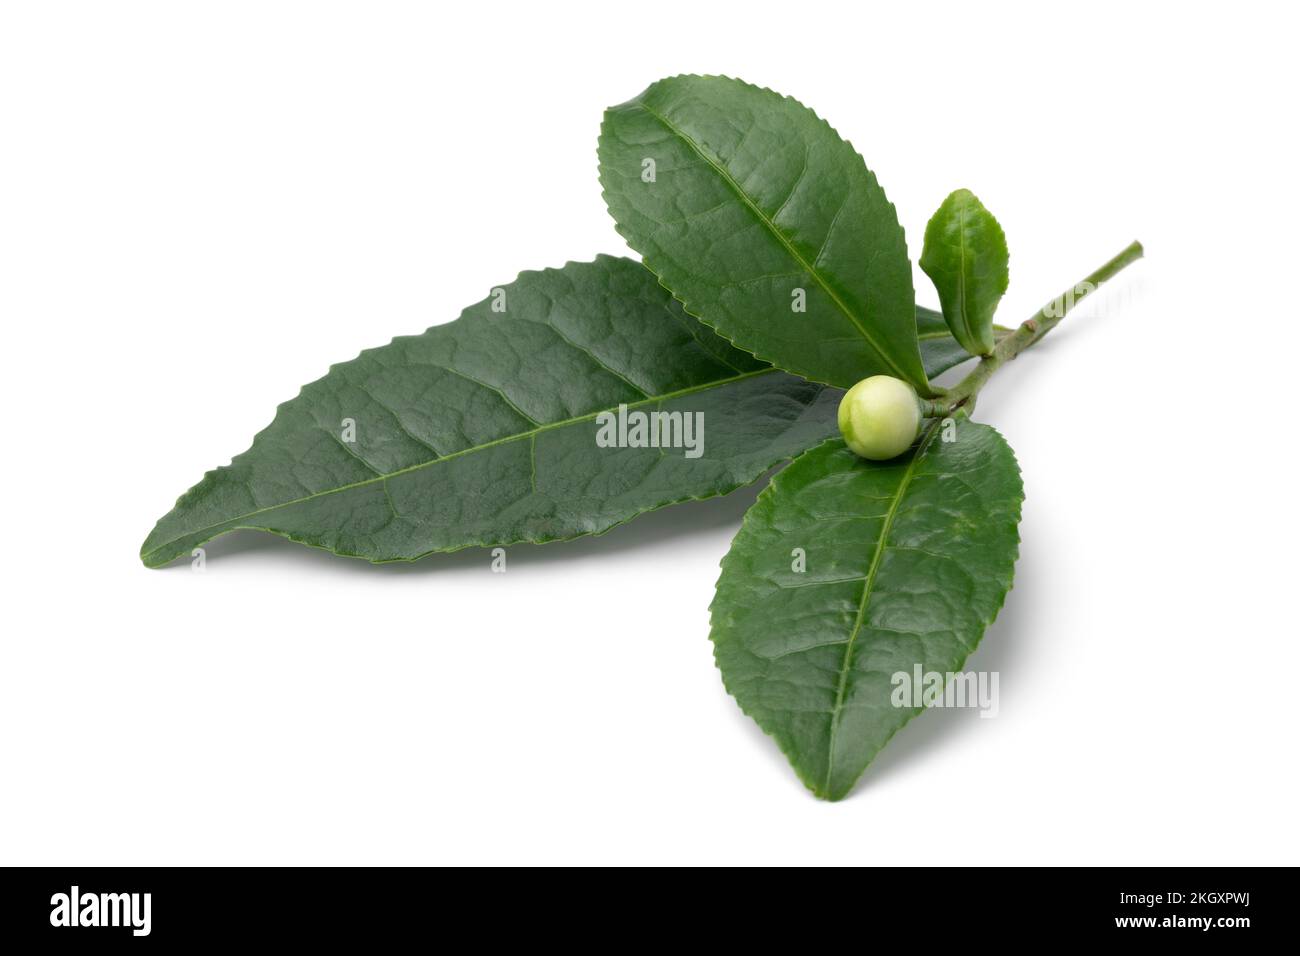 Single fresh tea flower bud, Camellia sinensis, and leaves isolated on white background Stock Photo